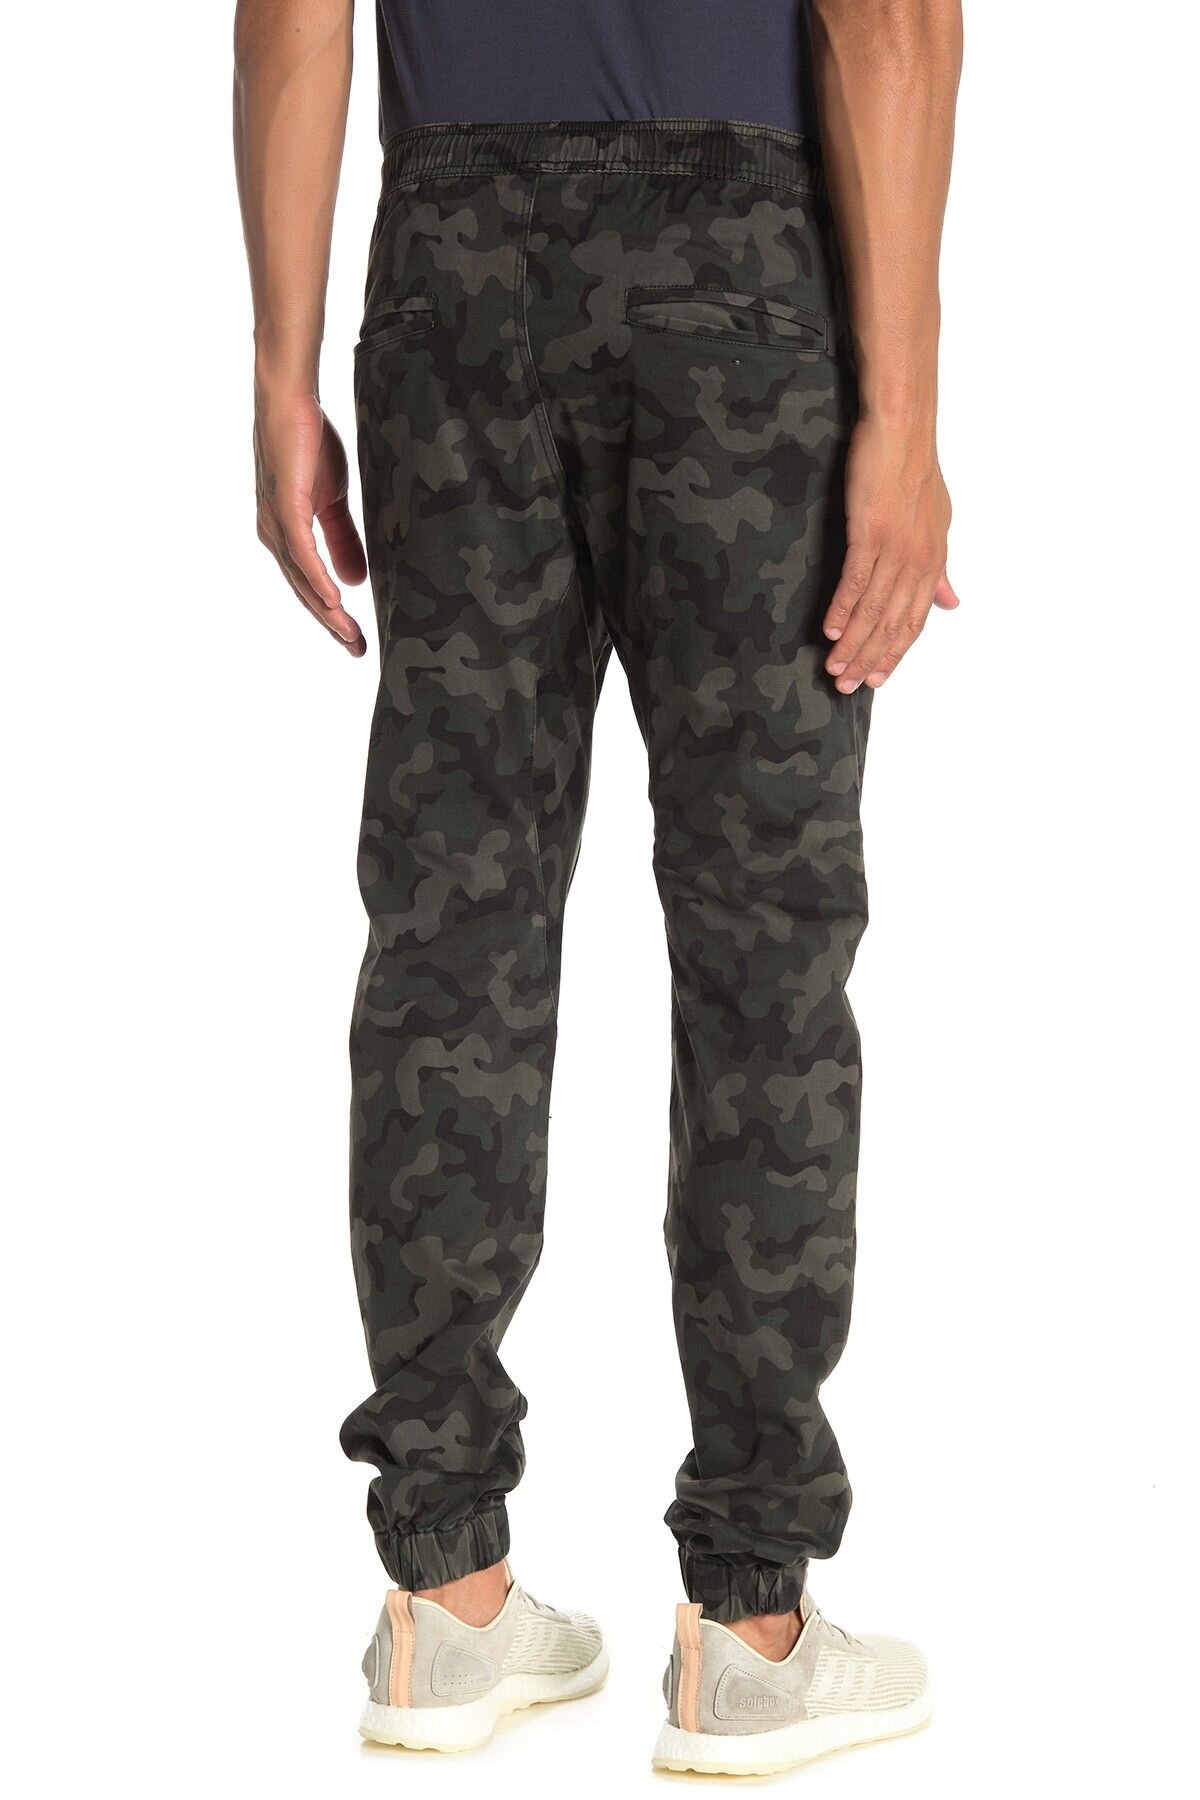 Zanerobe Sureshot Camo Print Joggers On Sale For 42% Off! — Clothes ...